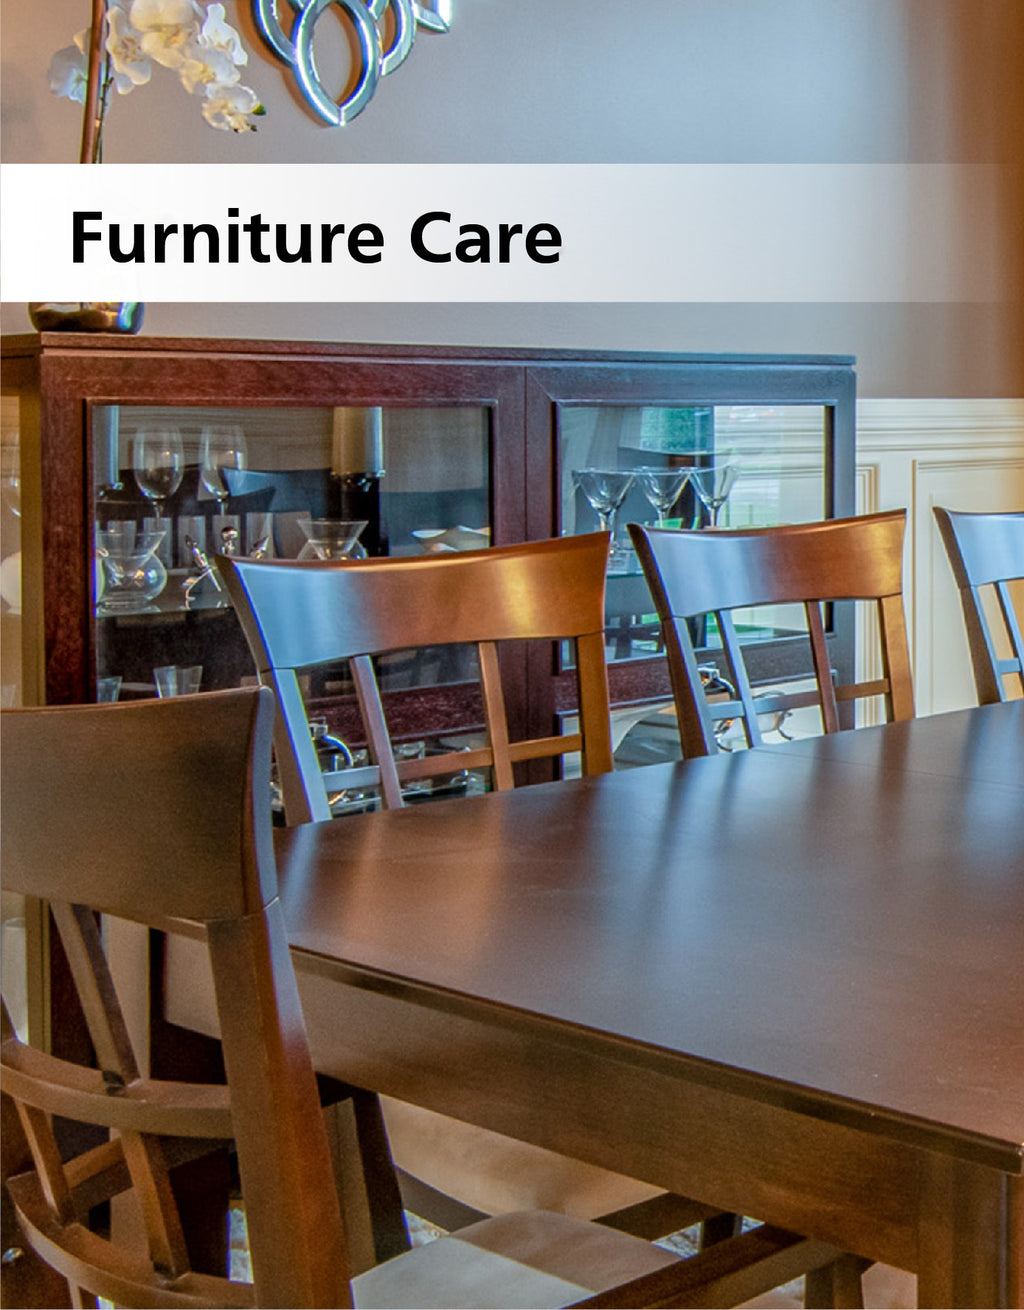 The words furniture care with picture of wood table and chairs